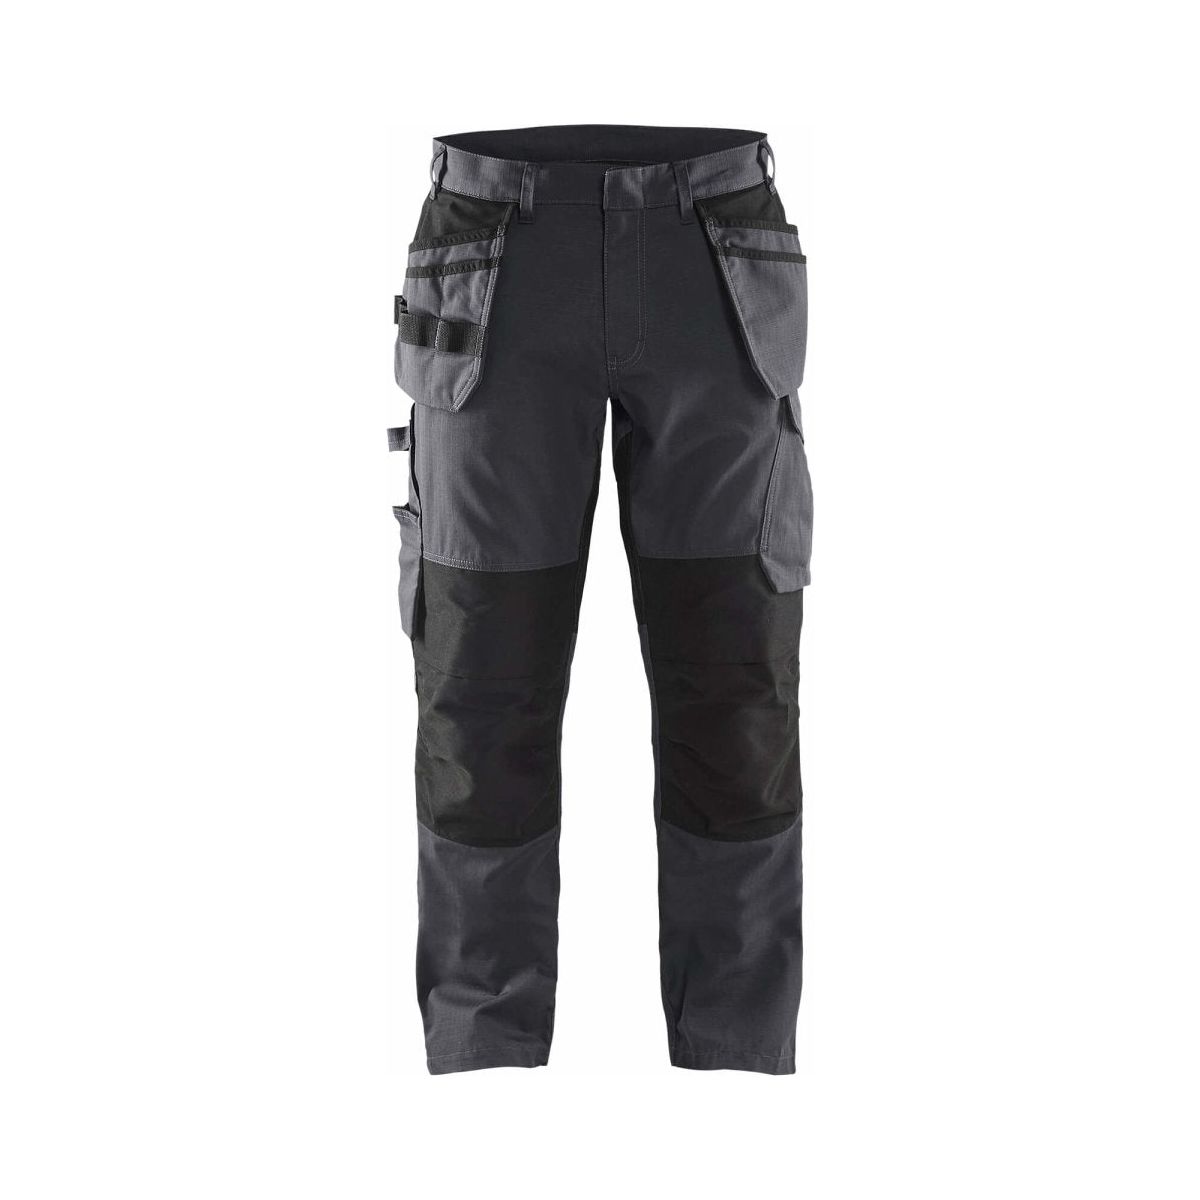 Bisley Workwear UK  FLX  MOVE Utility Trouser With Kevlar Knee Pads